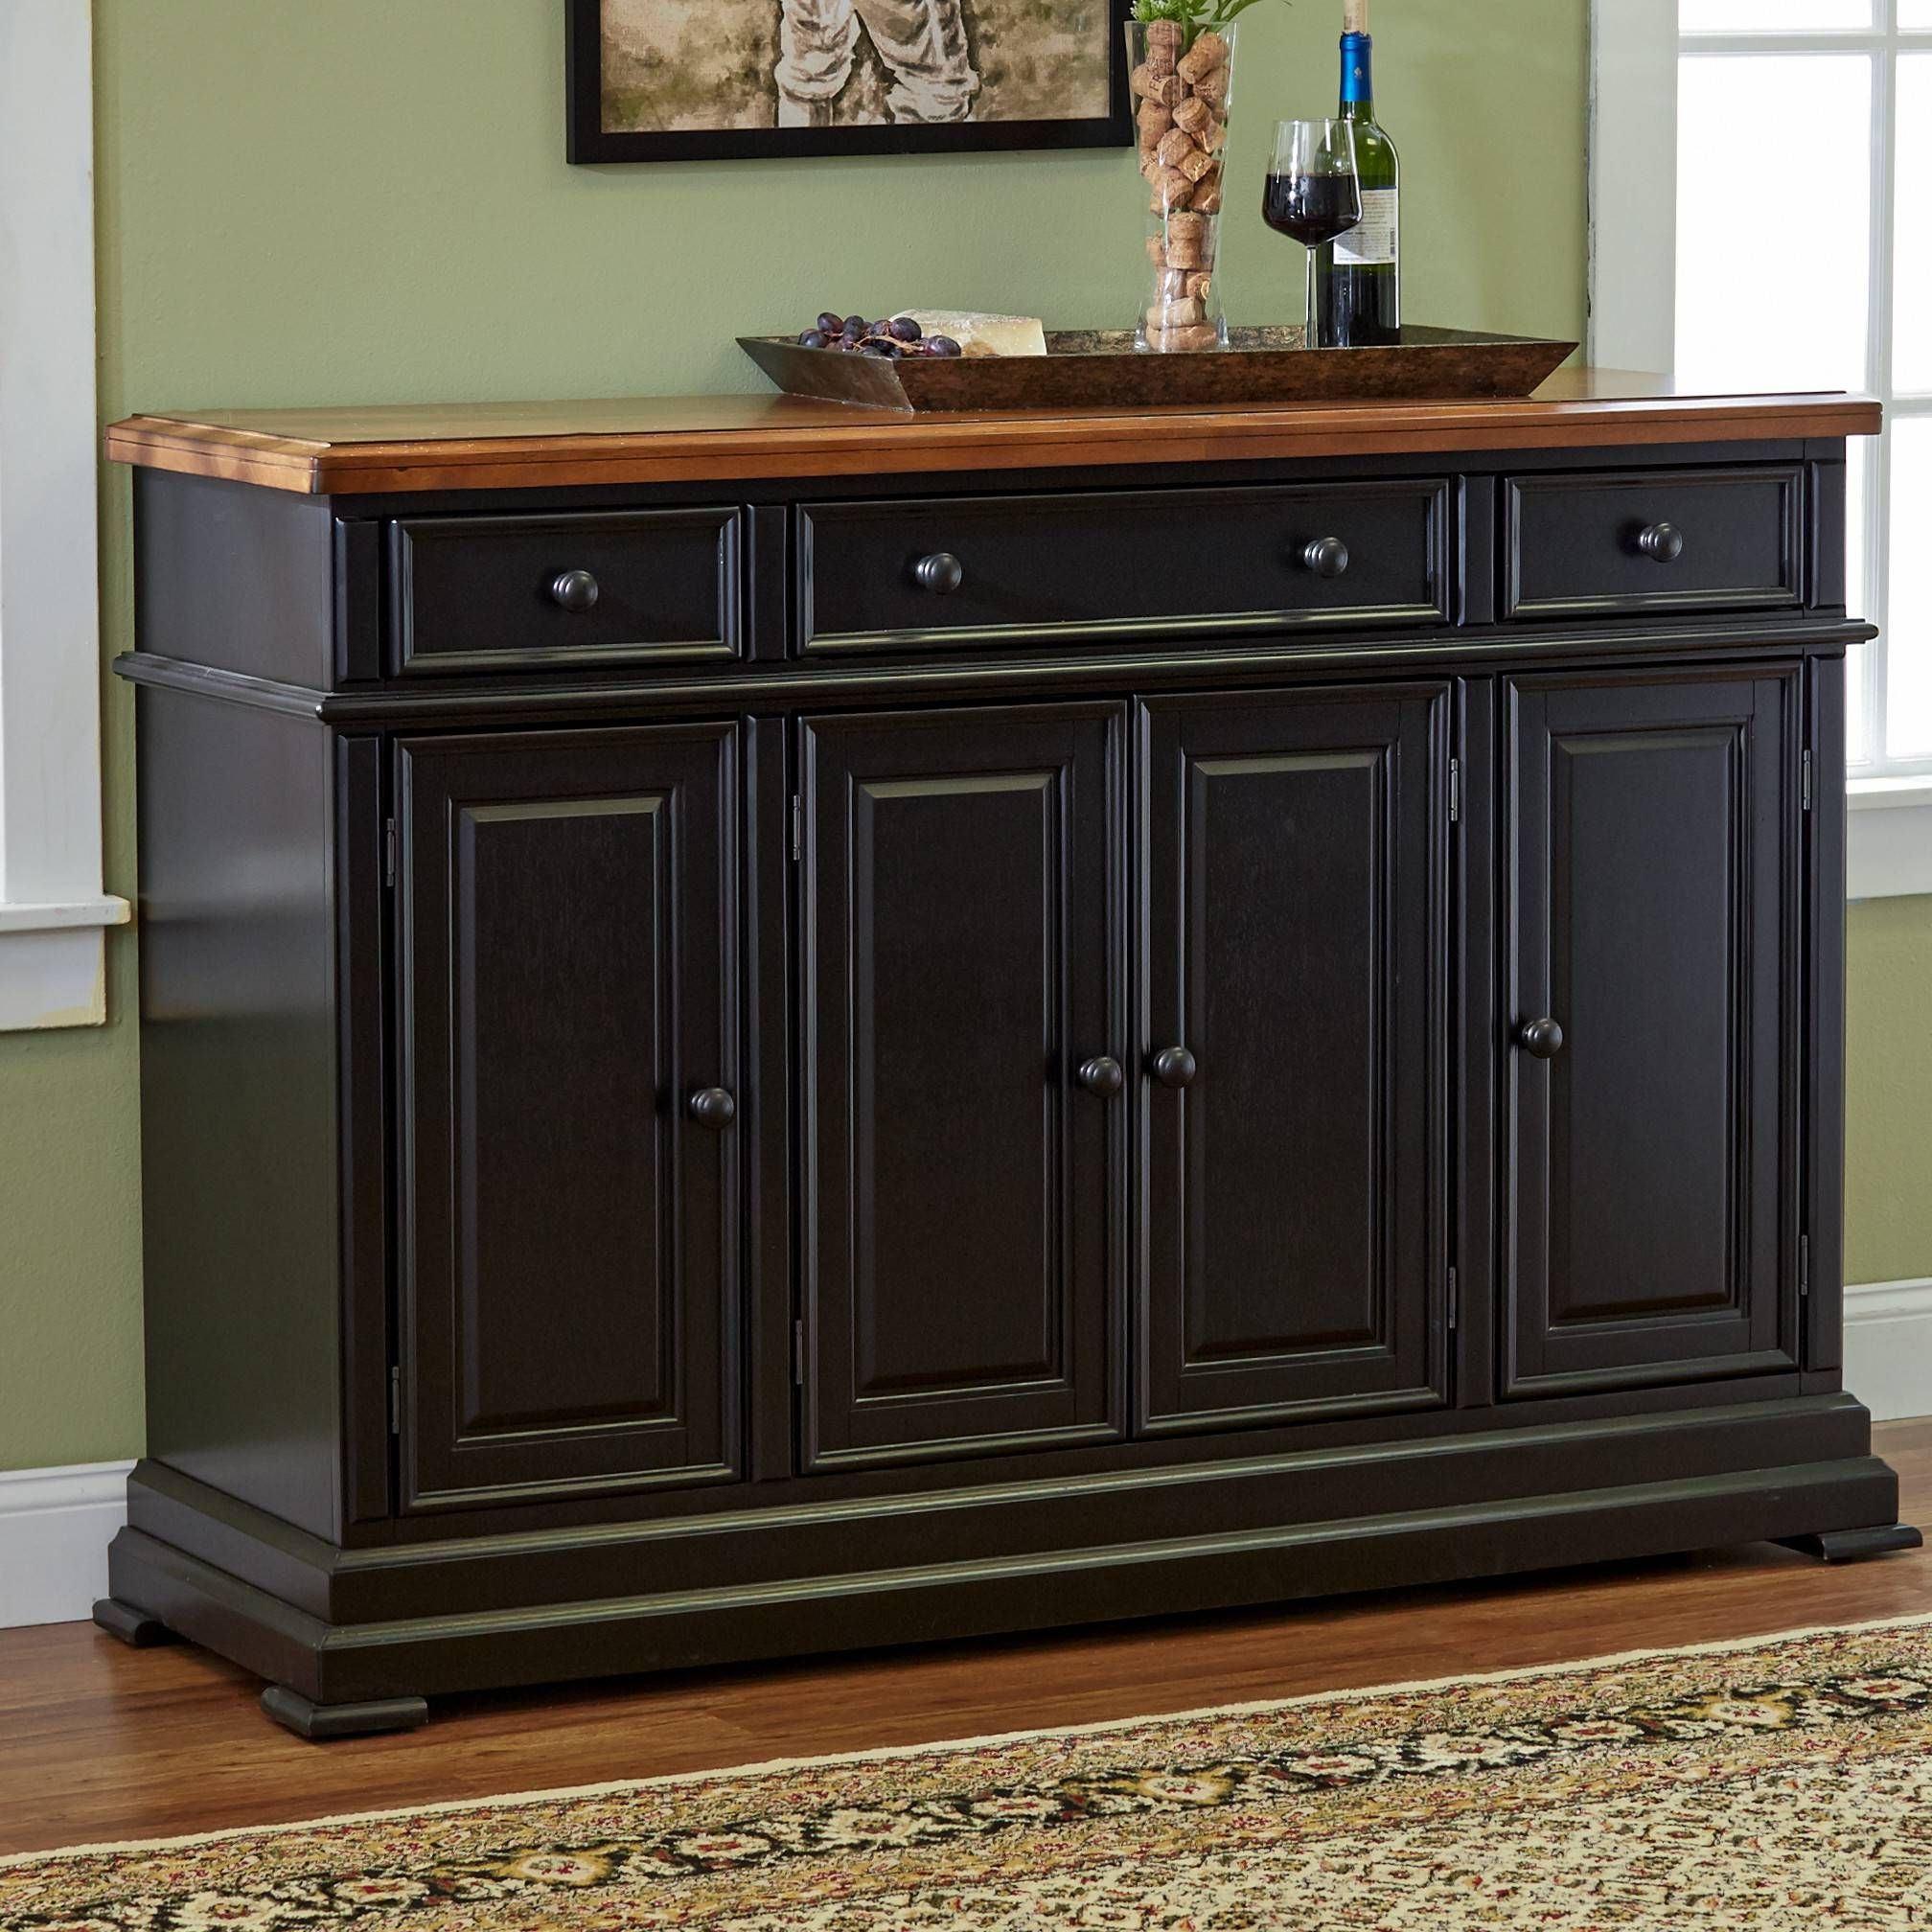 Beautiful Sideboards And Servers – Bjdgjy Pertaining To Dining Room Servers And Sideboards (Photo 5 of 15)